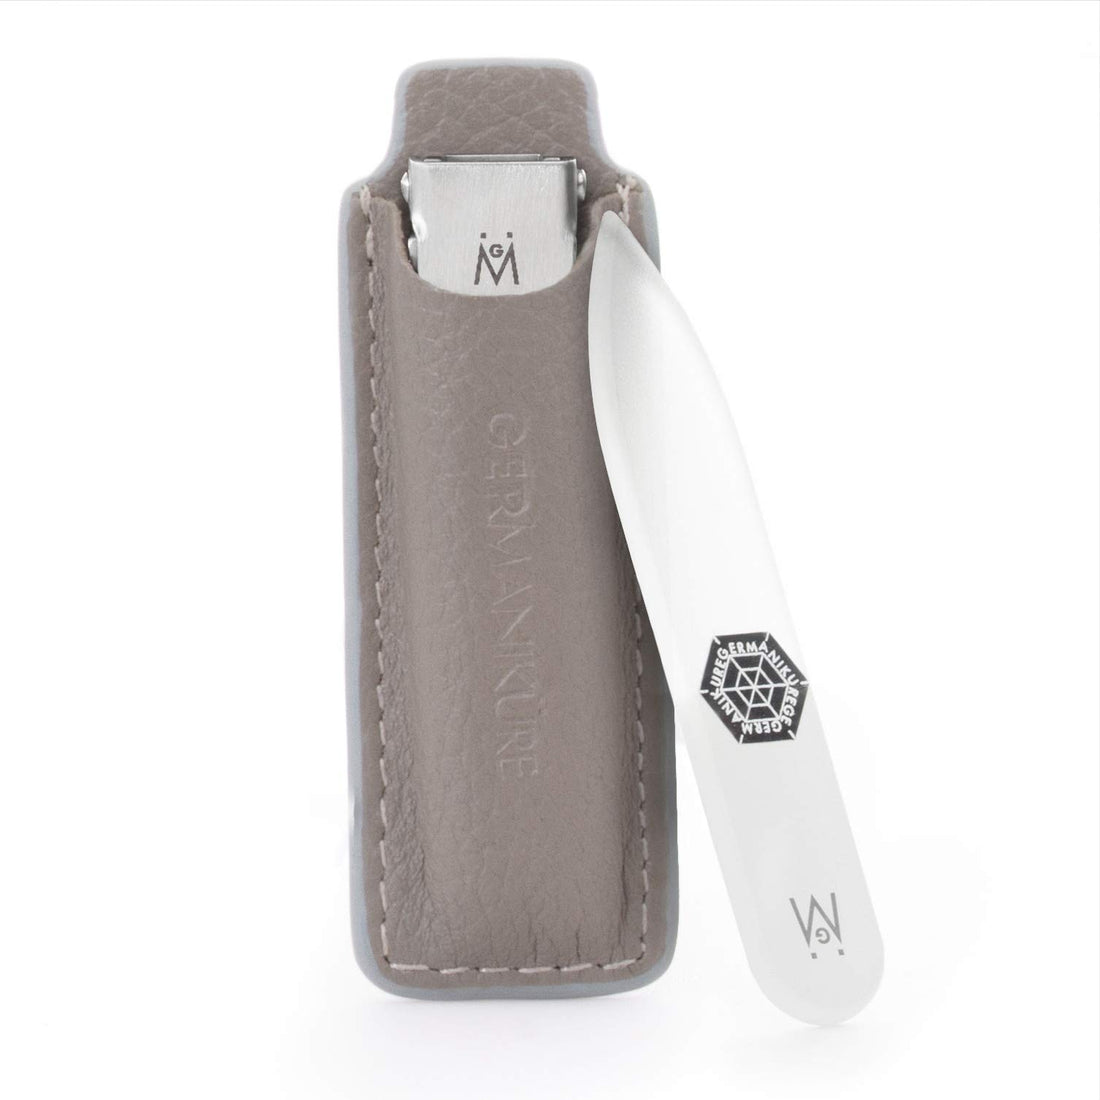 2 Piece Set: Flat Foldable Nail Clipper and Mini Glass Nail File in Leather Case